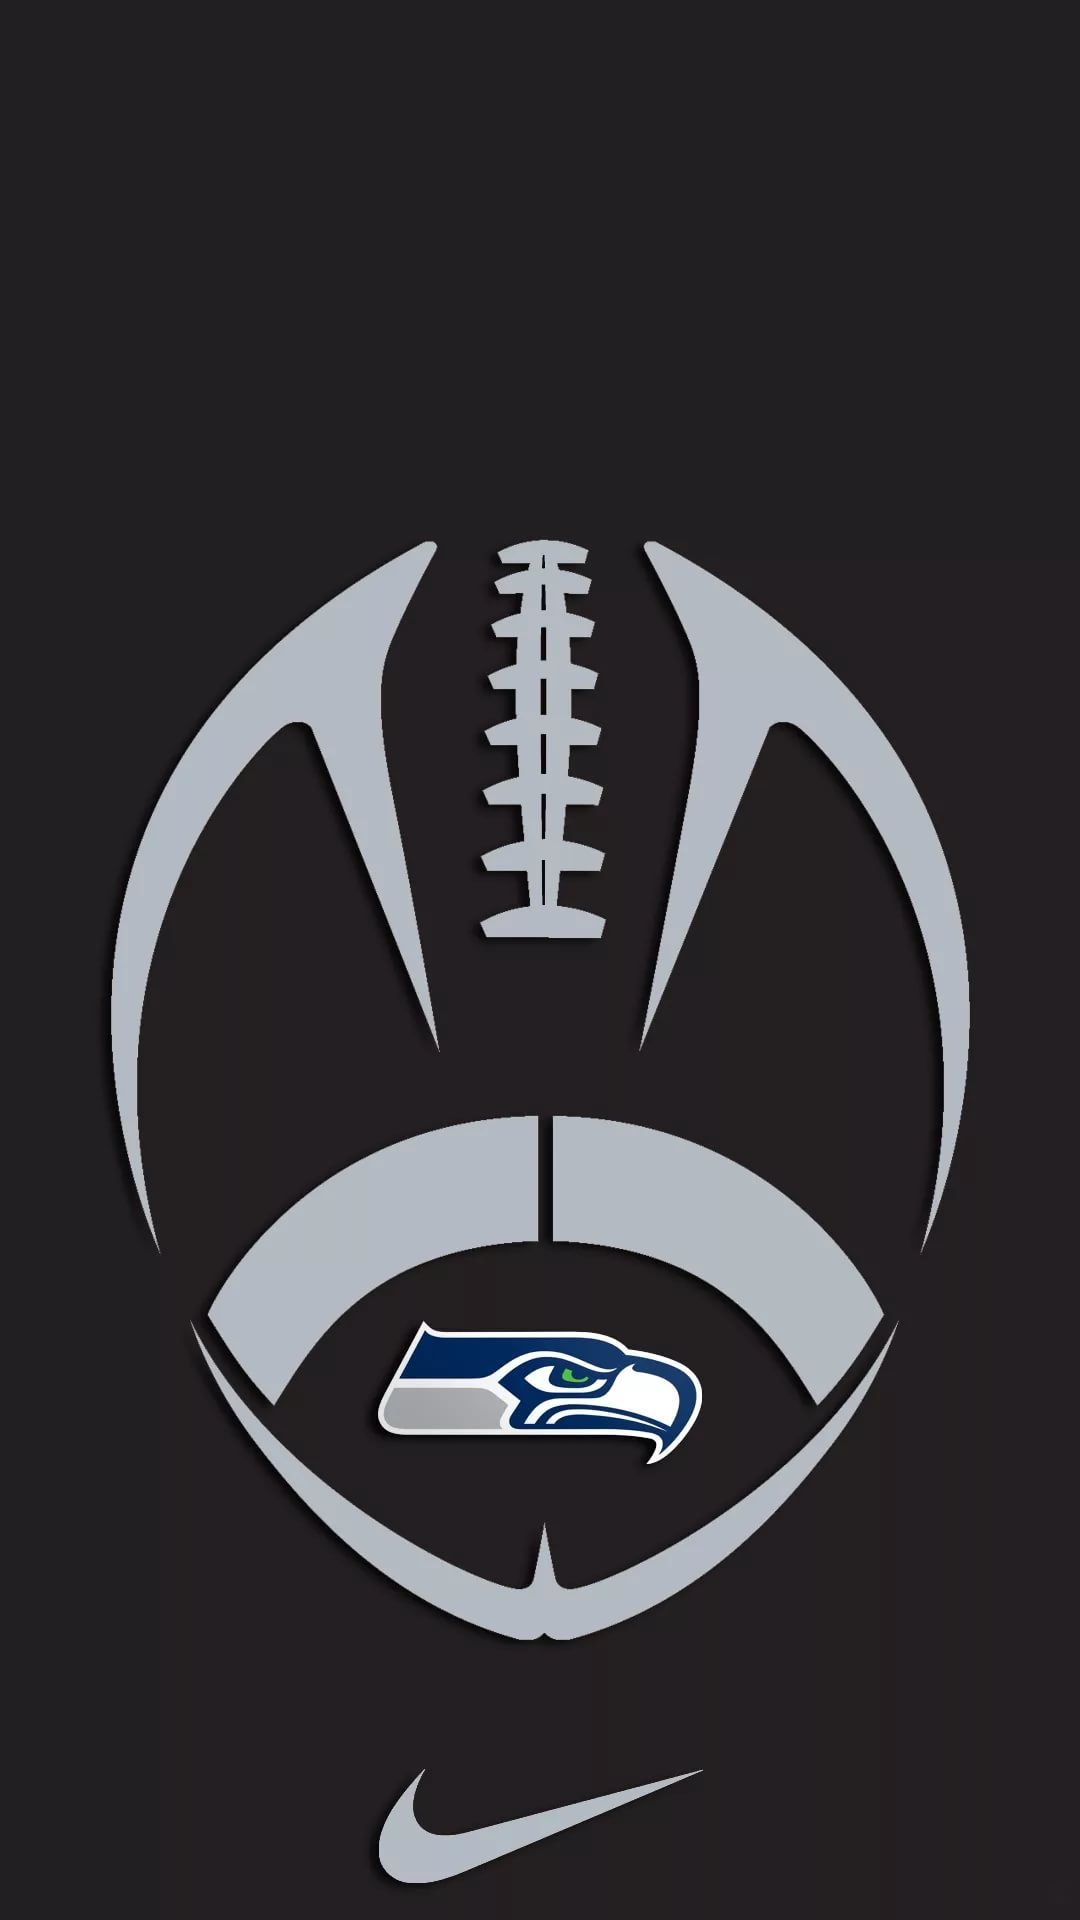 NFL free wallpaper for Android